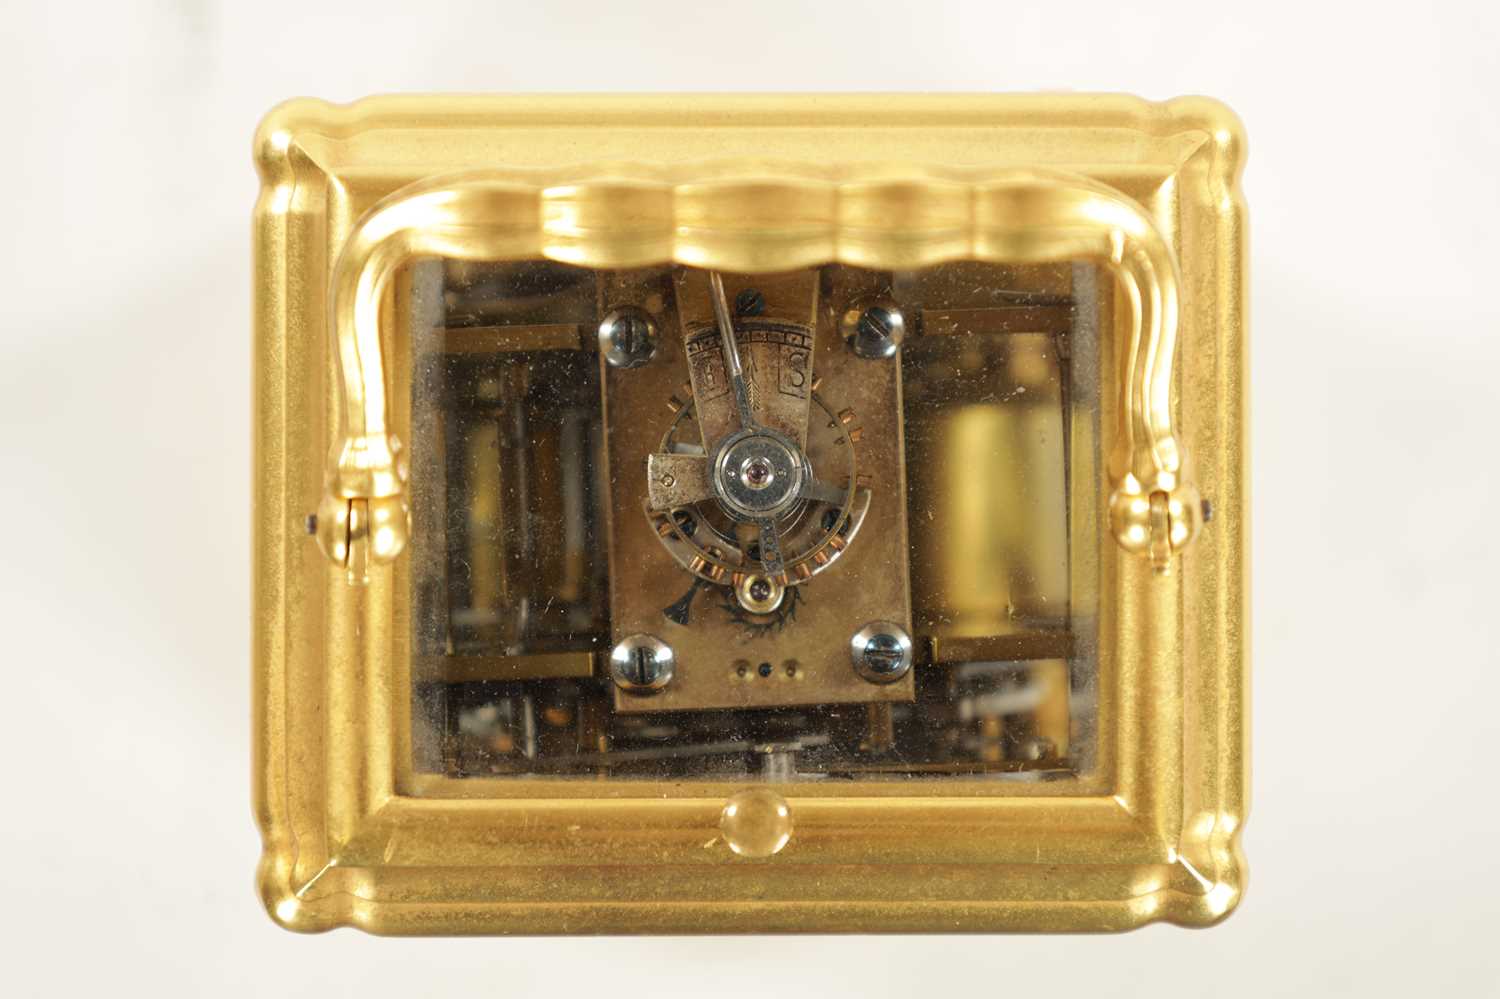 A LATE 19TH CENTURY FRENCH GORGE-CASED QUARTER CHIMING/REPEATING CARRIAGE CLOCK - Image 9 of 9